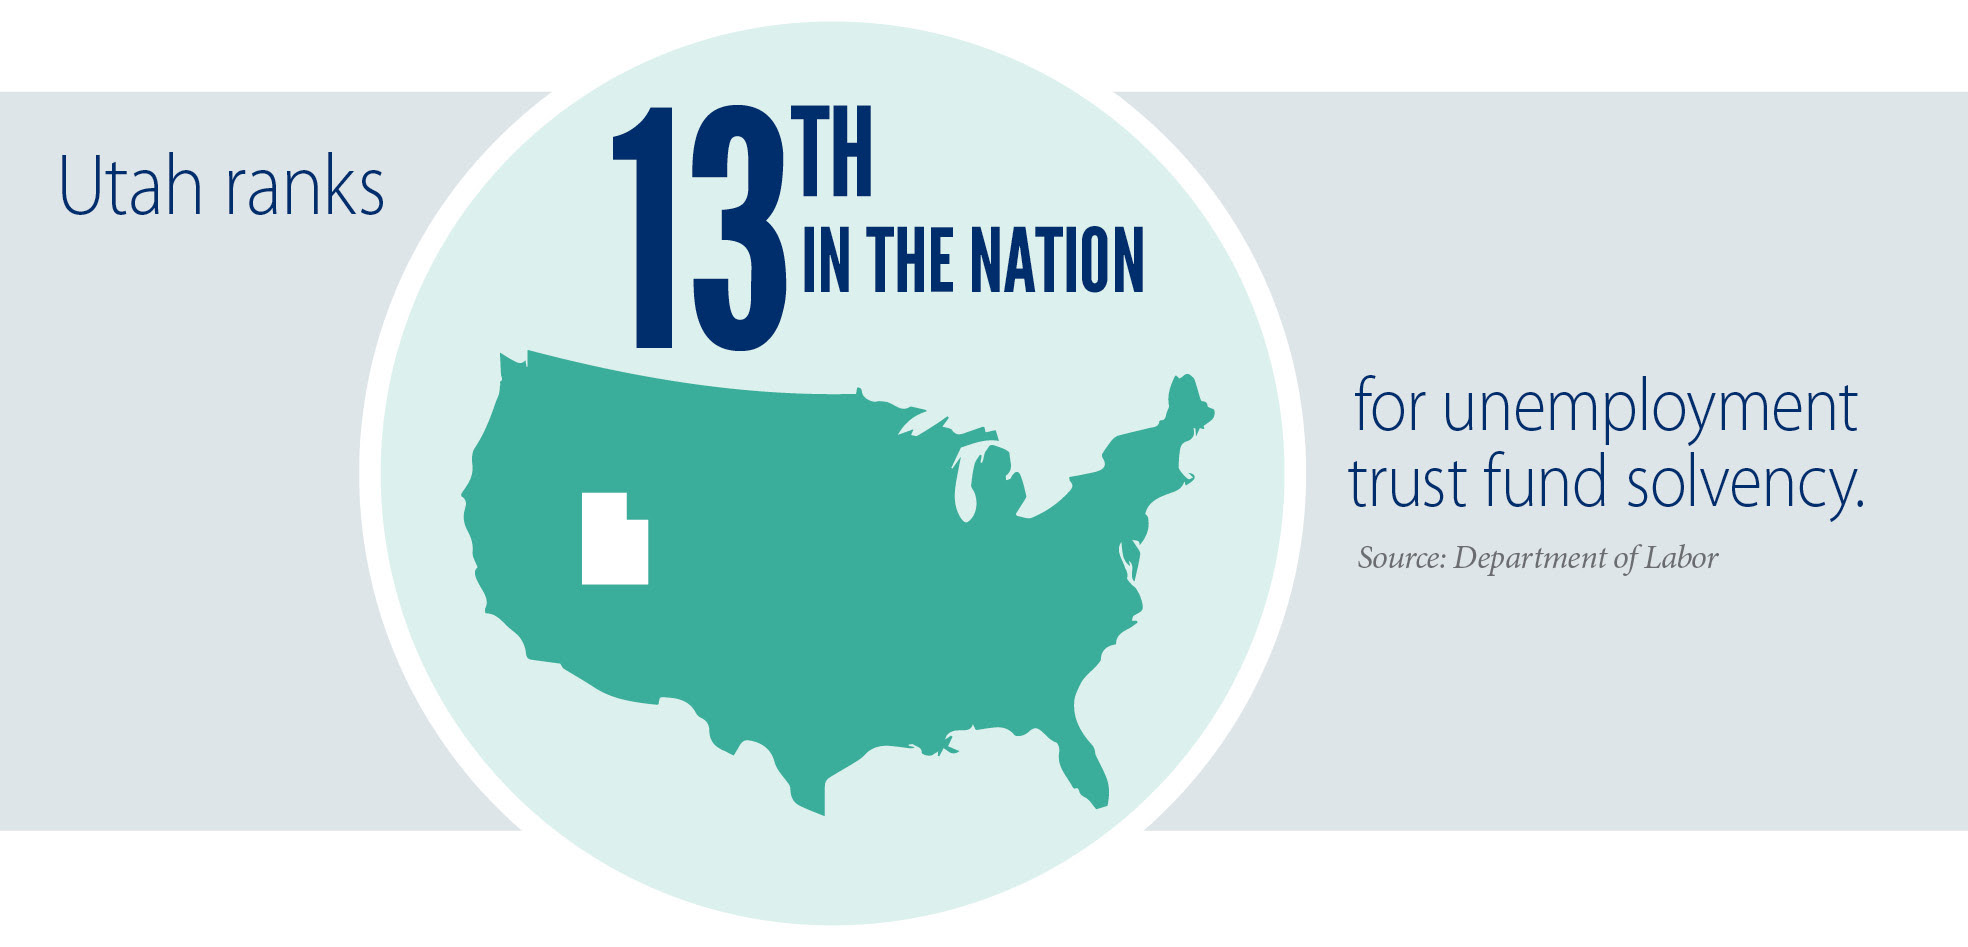 Utah Ranks 13th in the nation for unemployment trust fund solvency. Source: Department of Labor.